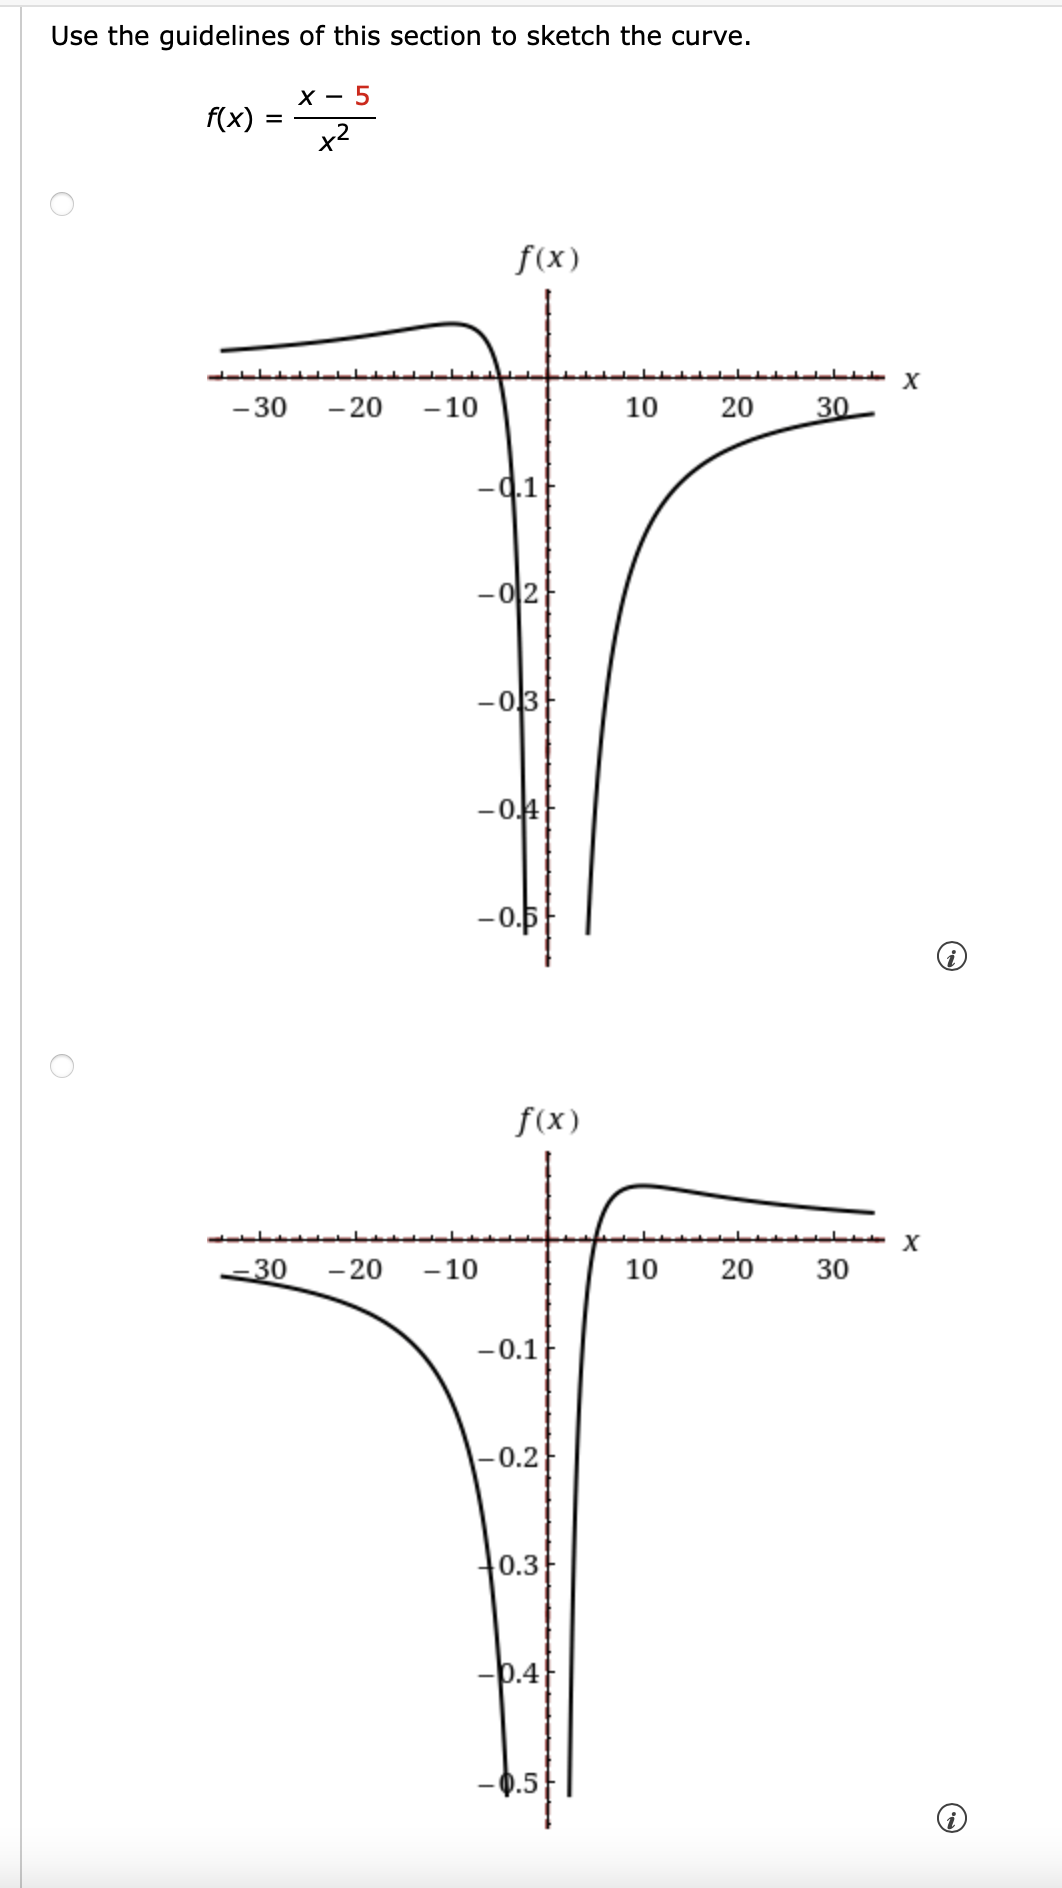 Use the guidelines of this section to sketch the curve.
X - 5
f(x)
x2
f(x)
- 30
- 20
- 10
10
20
30
-4.1
-02
-03
-0.4}
-0.5
f(x)
<30
- 20
- 10
10
20
30
-0.1
-0.2
0.3
-b.4
0.5
